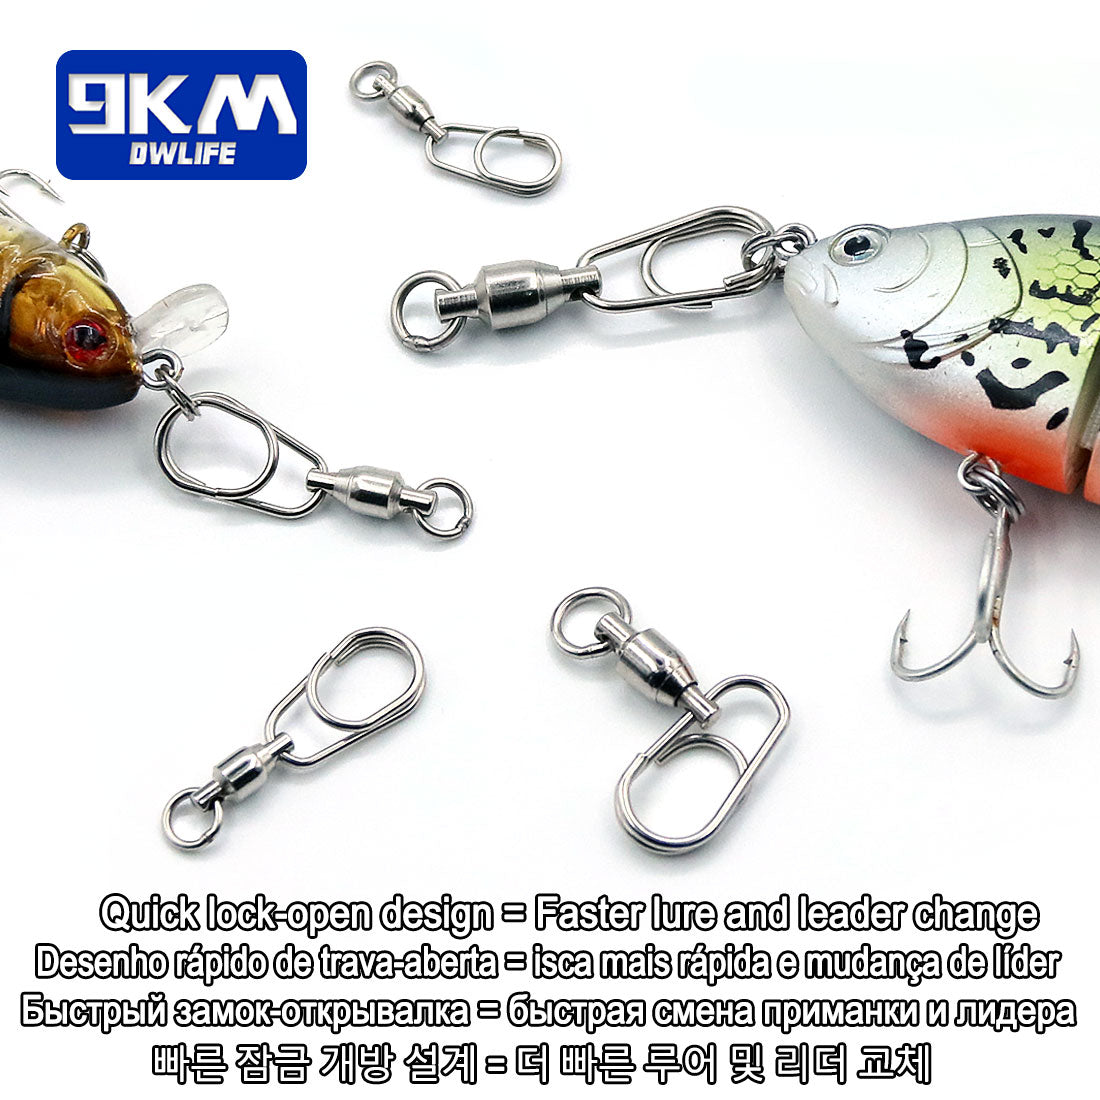 50Pcs/Bag Stainless Steel Connector Fishing Fastach Clips Fishing Swivels  Snaps Swivel Rolling Snap Quick Connection Accessory